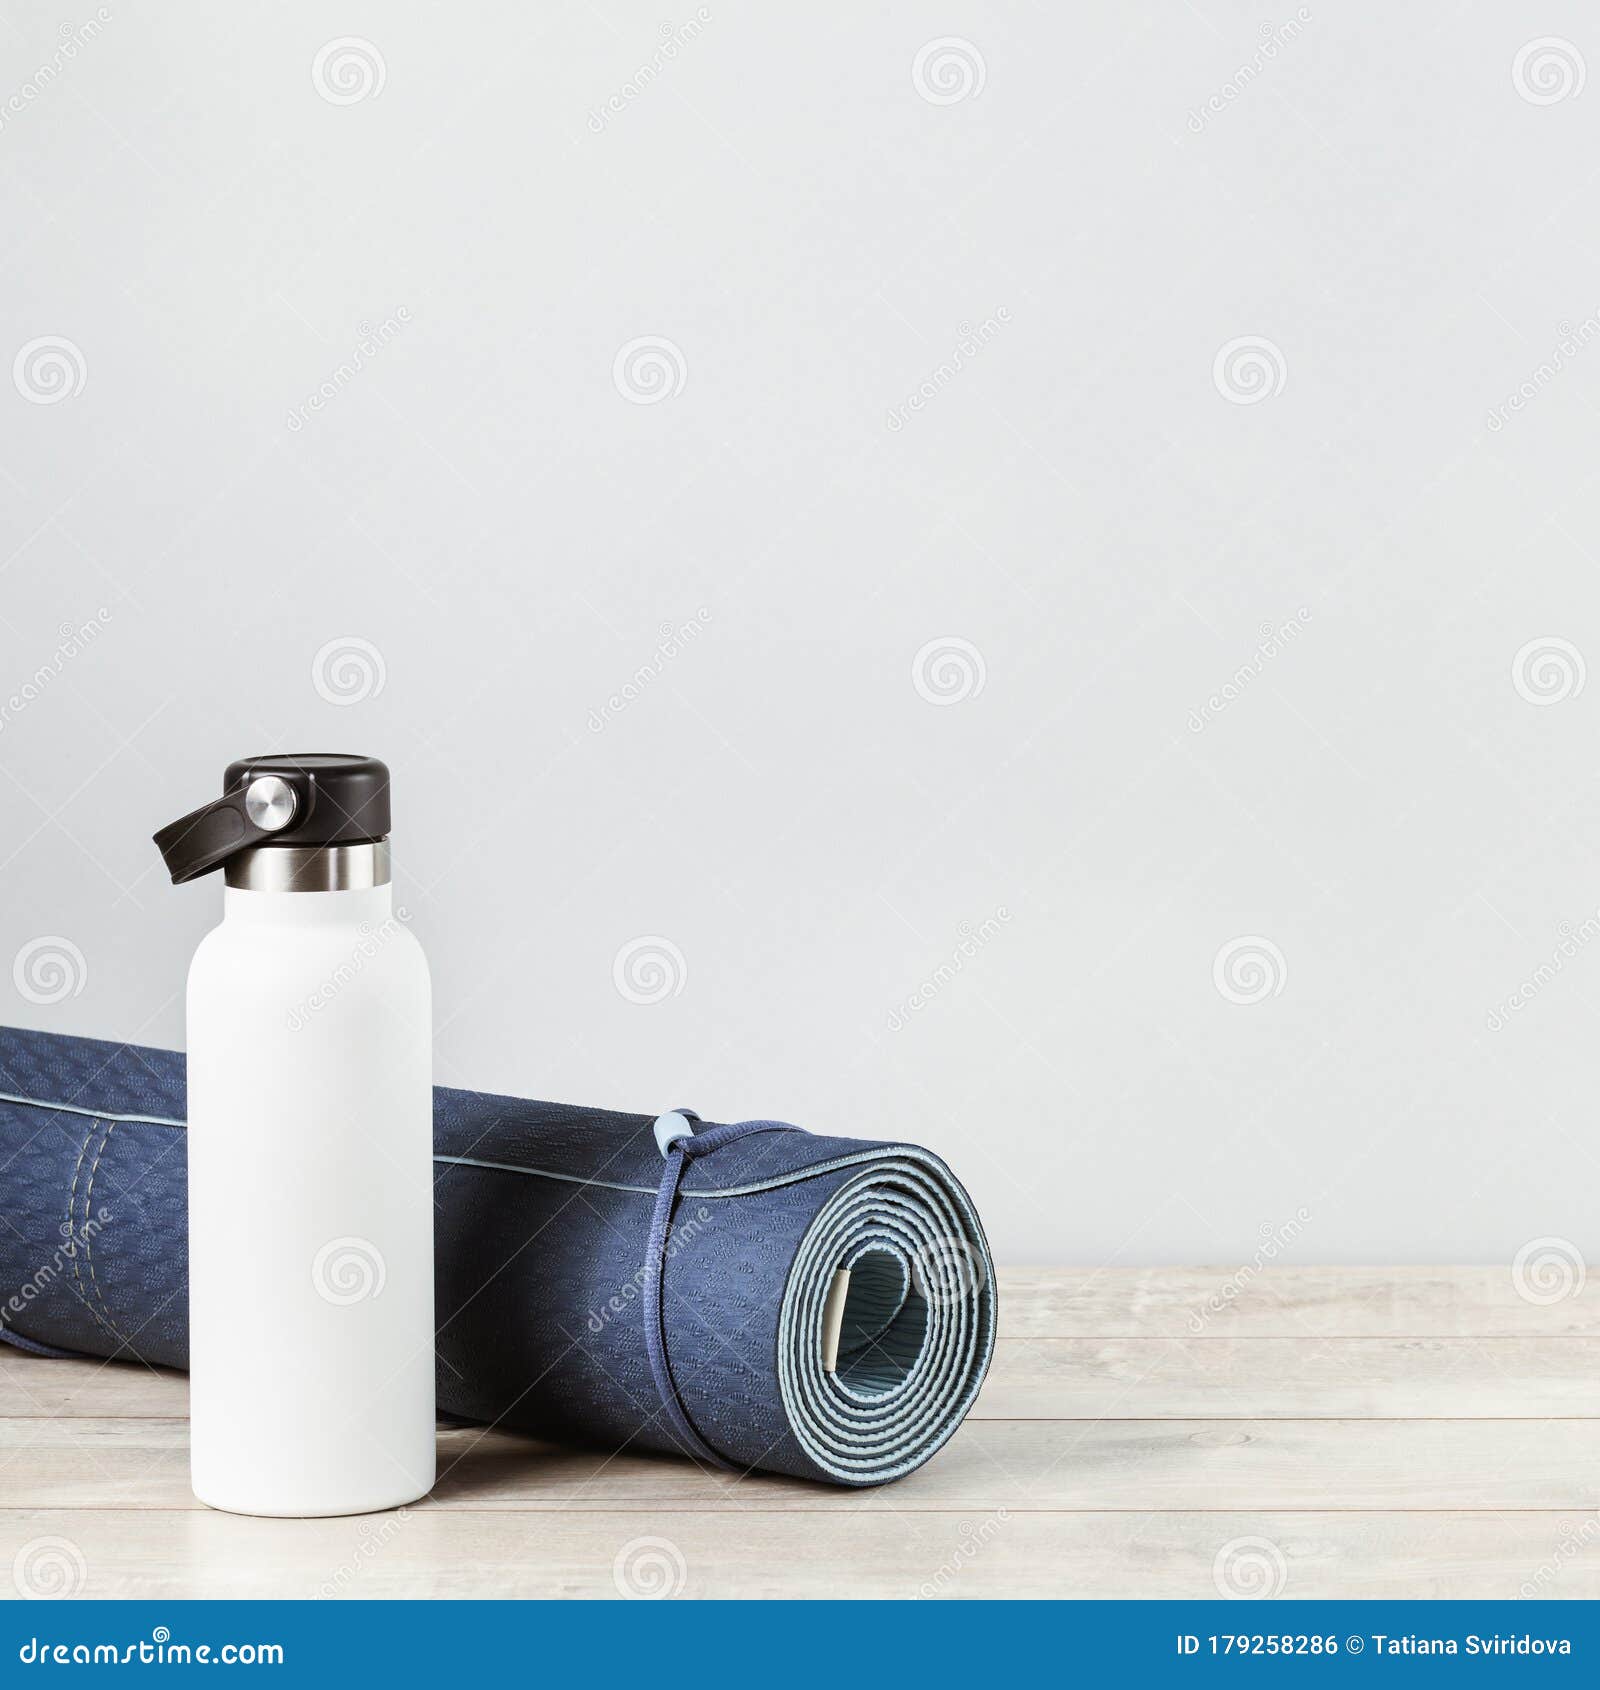 https://thumbs.dreamstime.com/z/rolled-yoga-mat-metal-water-bottle-blue-white-flask-grey-wooden-surface-gender-neutral-fitness-exercise-concept-hydration-179258286.jpg